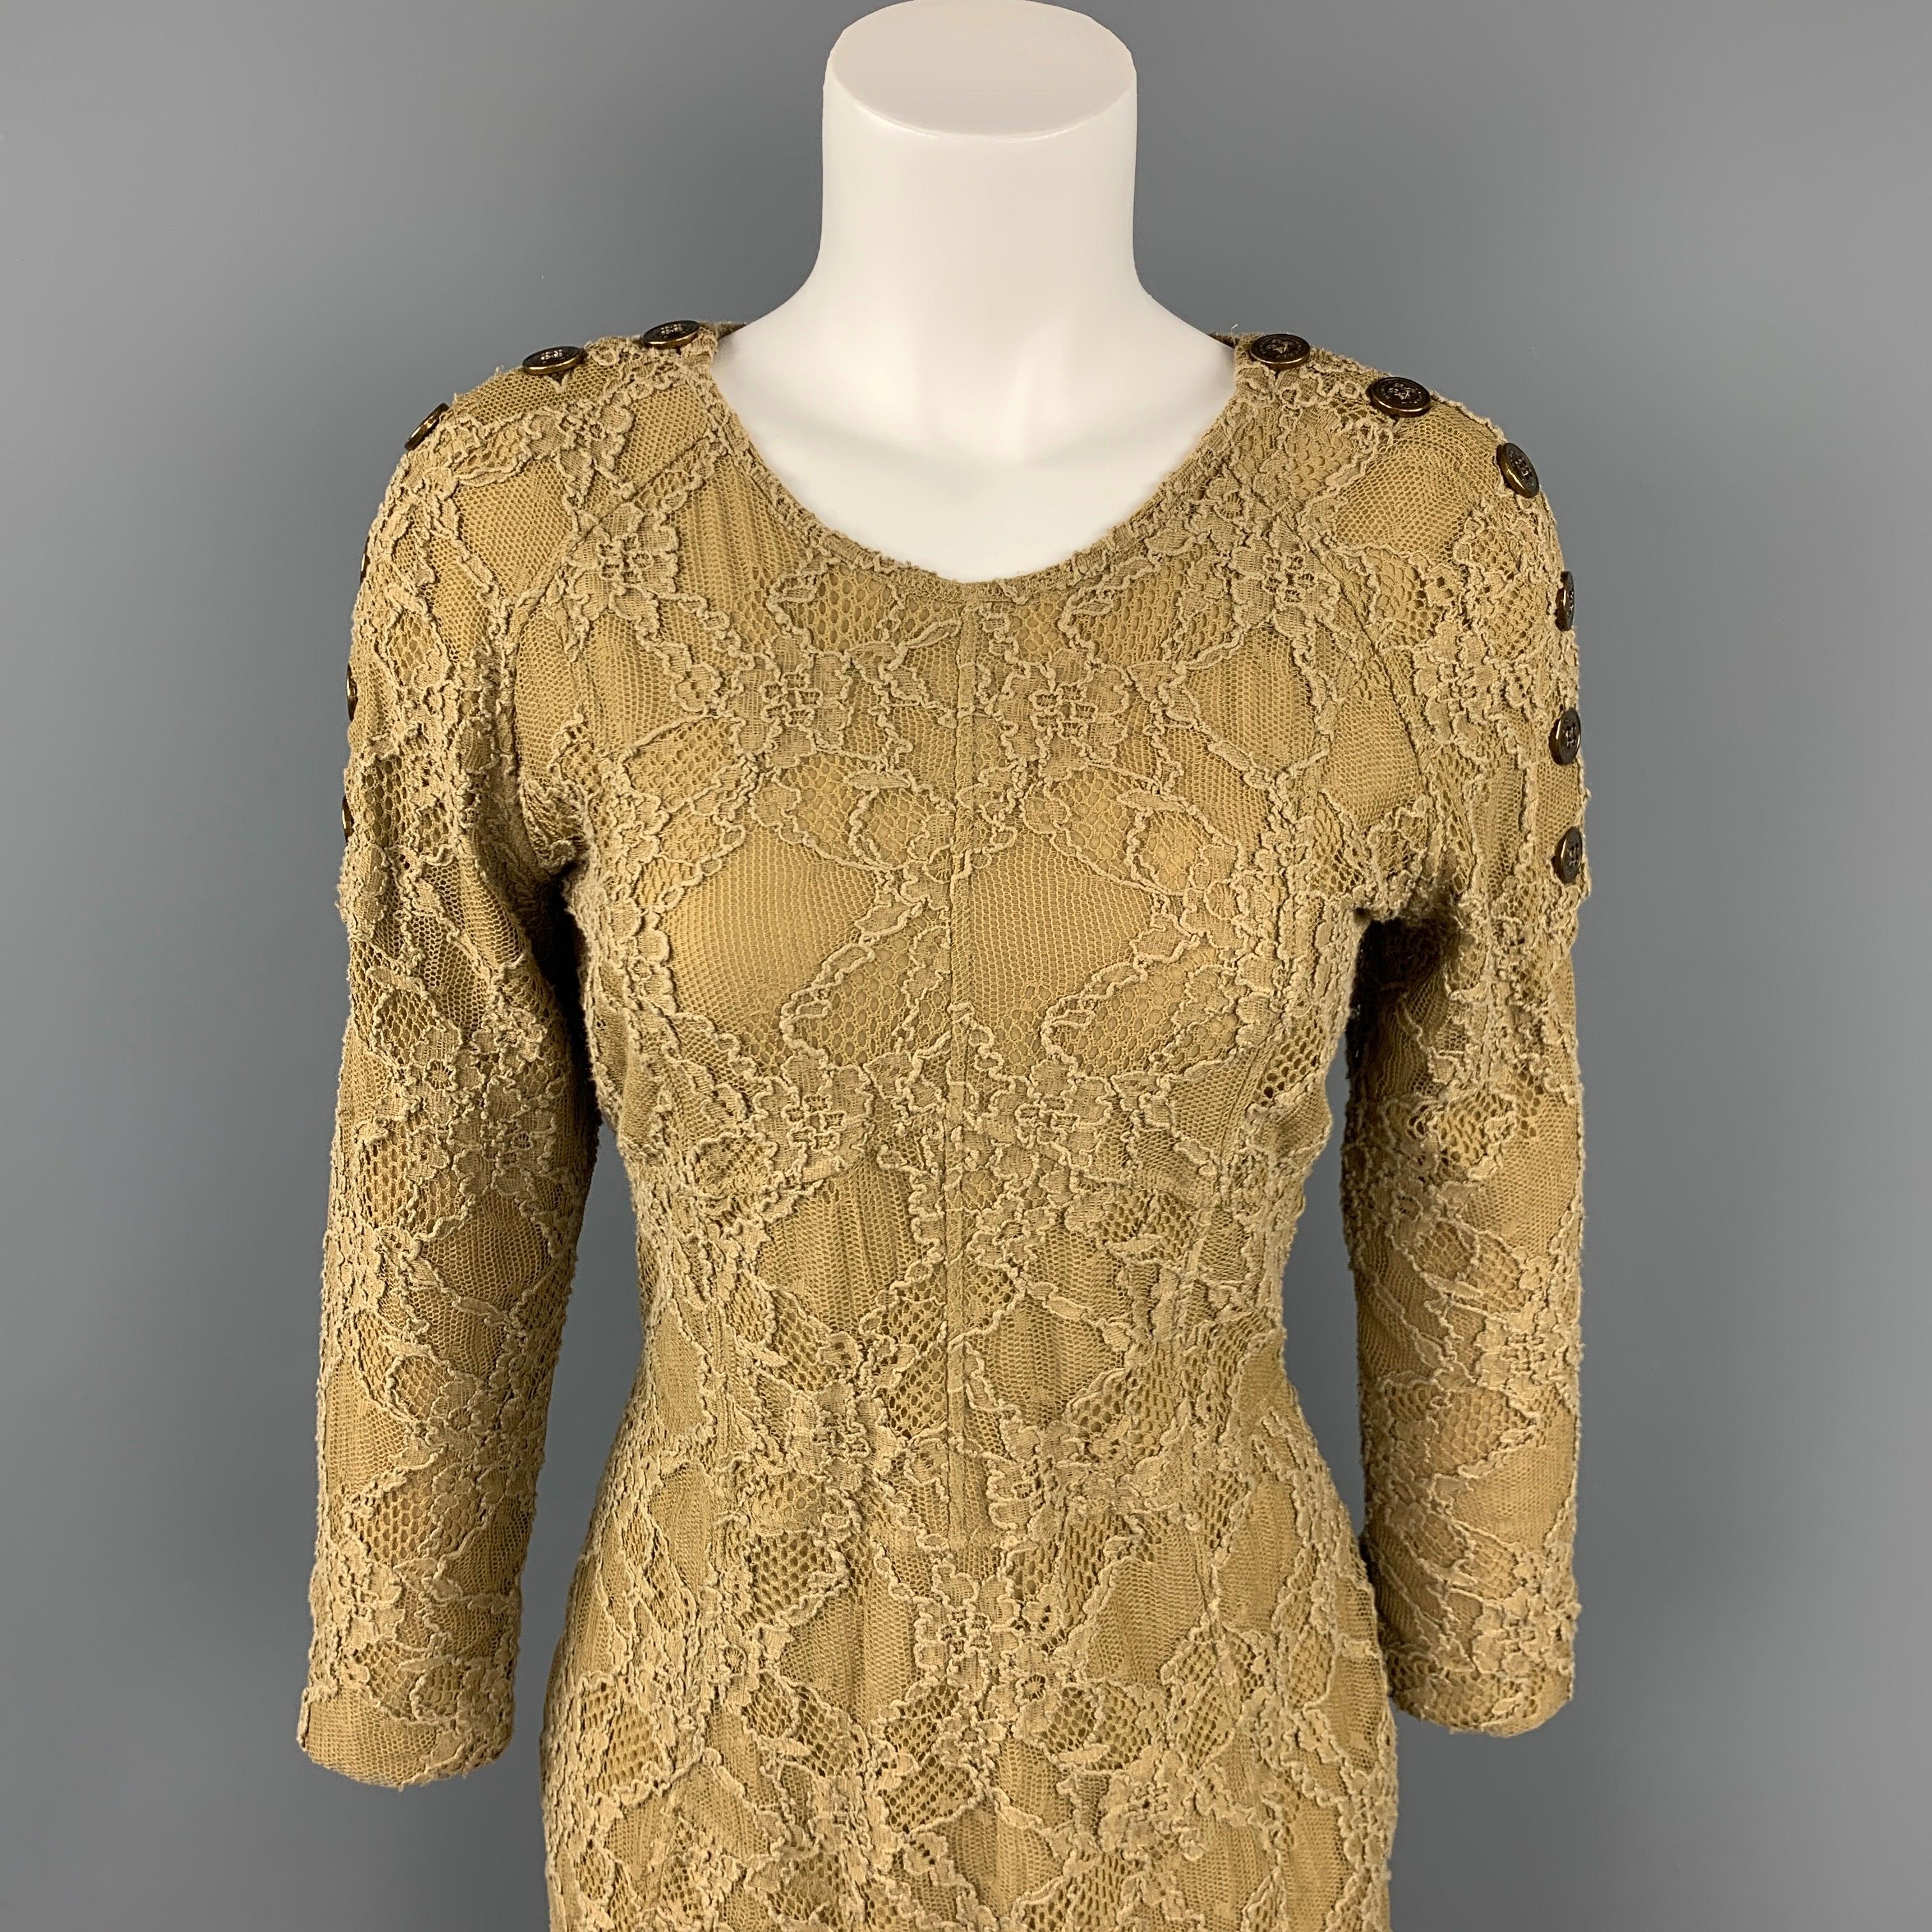 BURBERRY PRORSUM dress comes in a olive lace cotton featuring a shift style, shoulder buttons, and a back zip up closure. Made in Italy.Very Good
Pre-Owned Condition. 

Marked:   44 

Measurements: 
 
Shoulder: 17 inches  Bust: 32 inches  Waist: 28